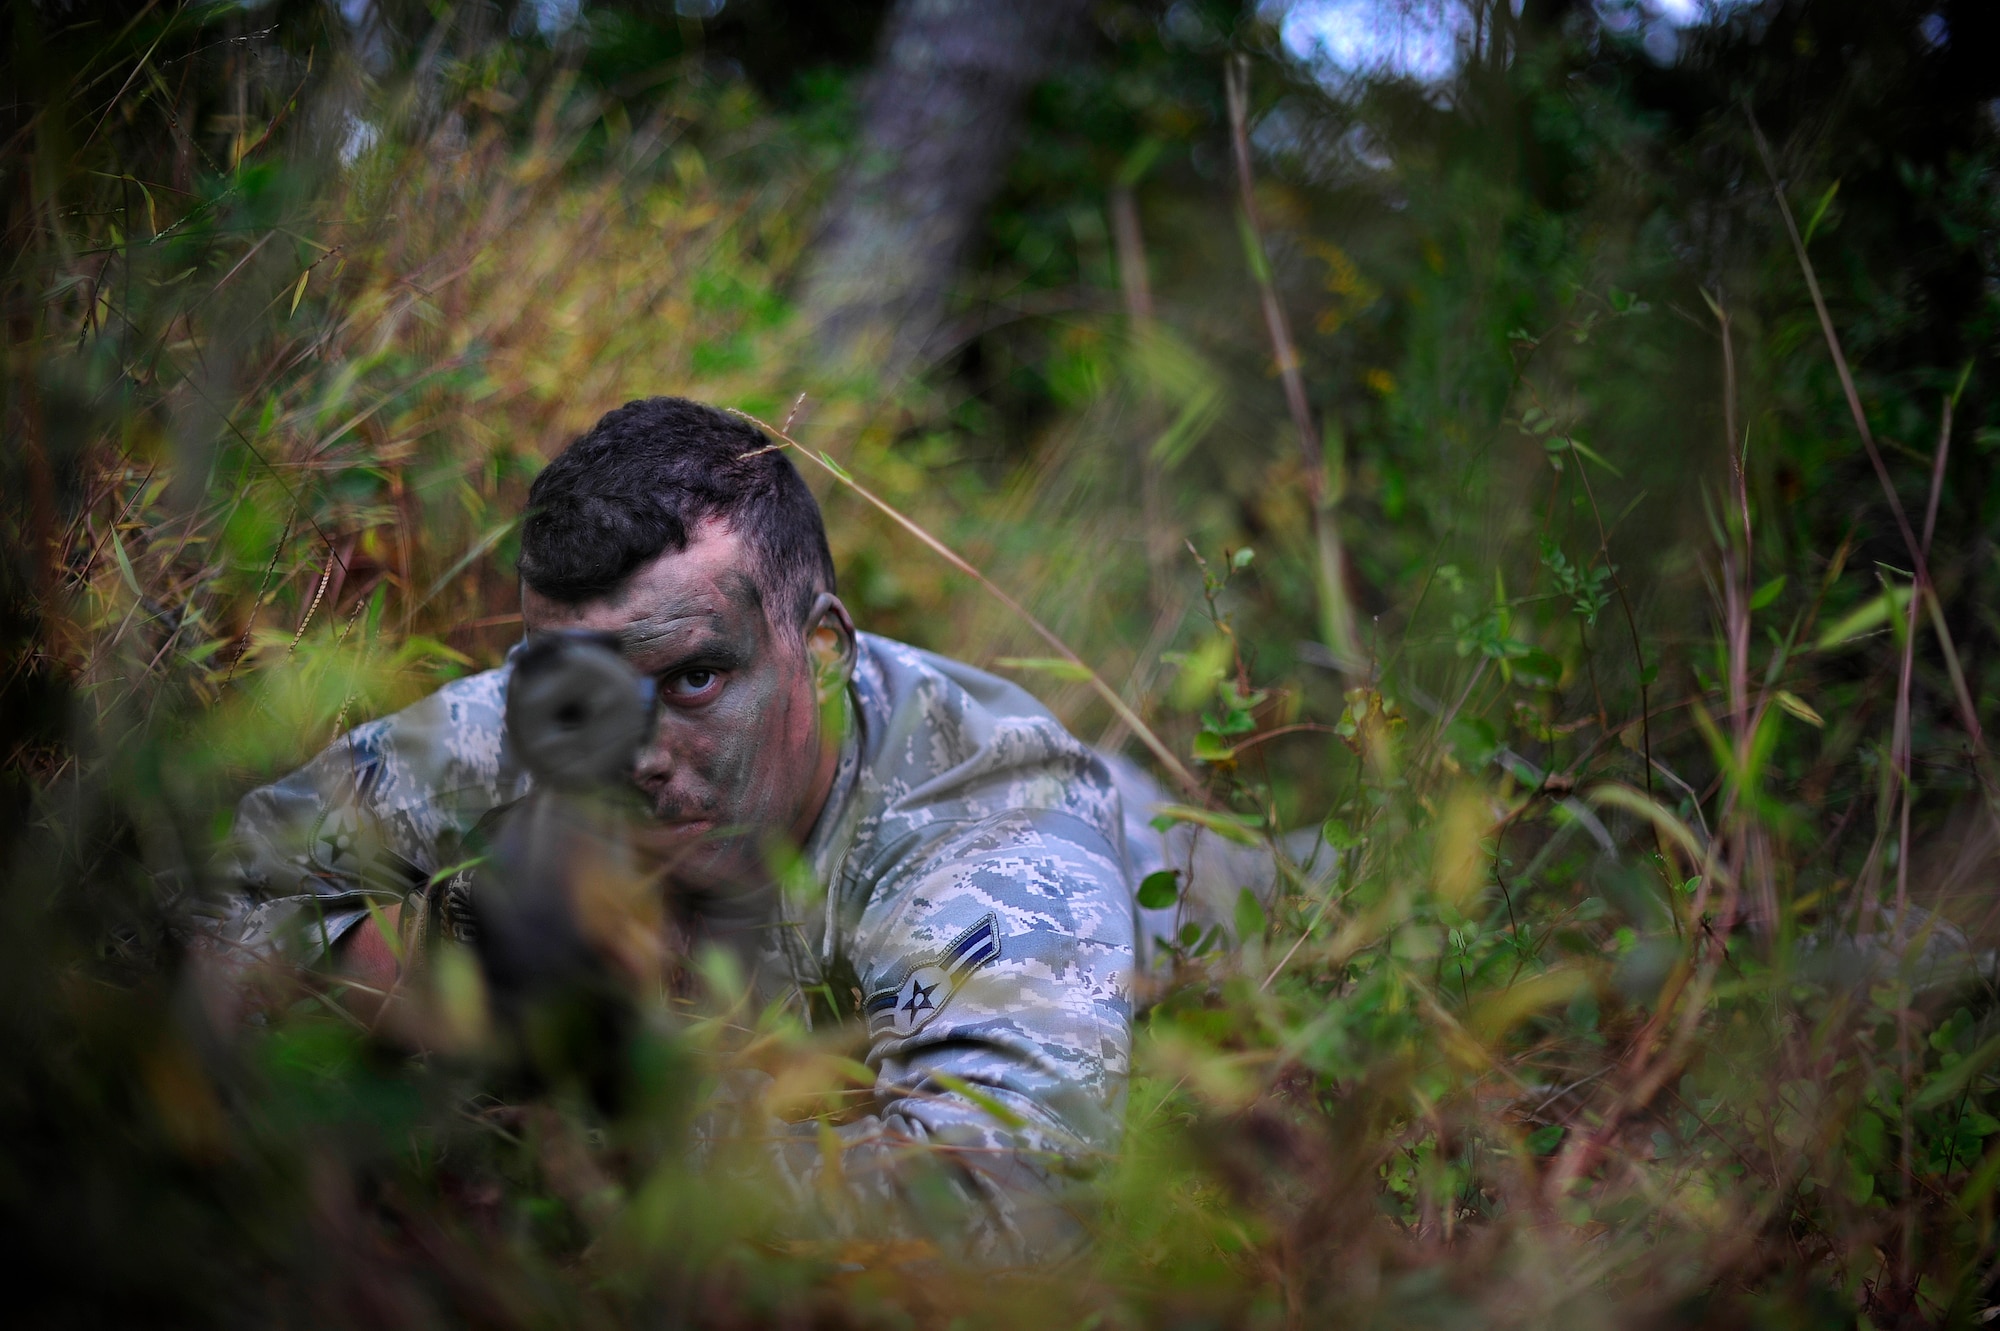 JOINT BASE MCGUIRE-DIX-LAKEHURST, N.J. -- Airman 1st Class Michael Studley, 818th Global Mobility Readiness Squadron close precision engagement course candidate, takes aim during a stalking exercise on a training range here Oct. 9.  Studley and six other candidates were participating in a  621st Contingency Response Wing run, 10-day CPEC indoctrination course to prepare them for the more rigorous 19-day U.S. Air Force CPEC course at Fort Bliss, Texas.  (U.S. Air Force photo by Tech. Sgt. Parker Gyokeres)